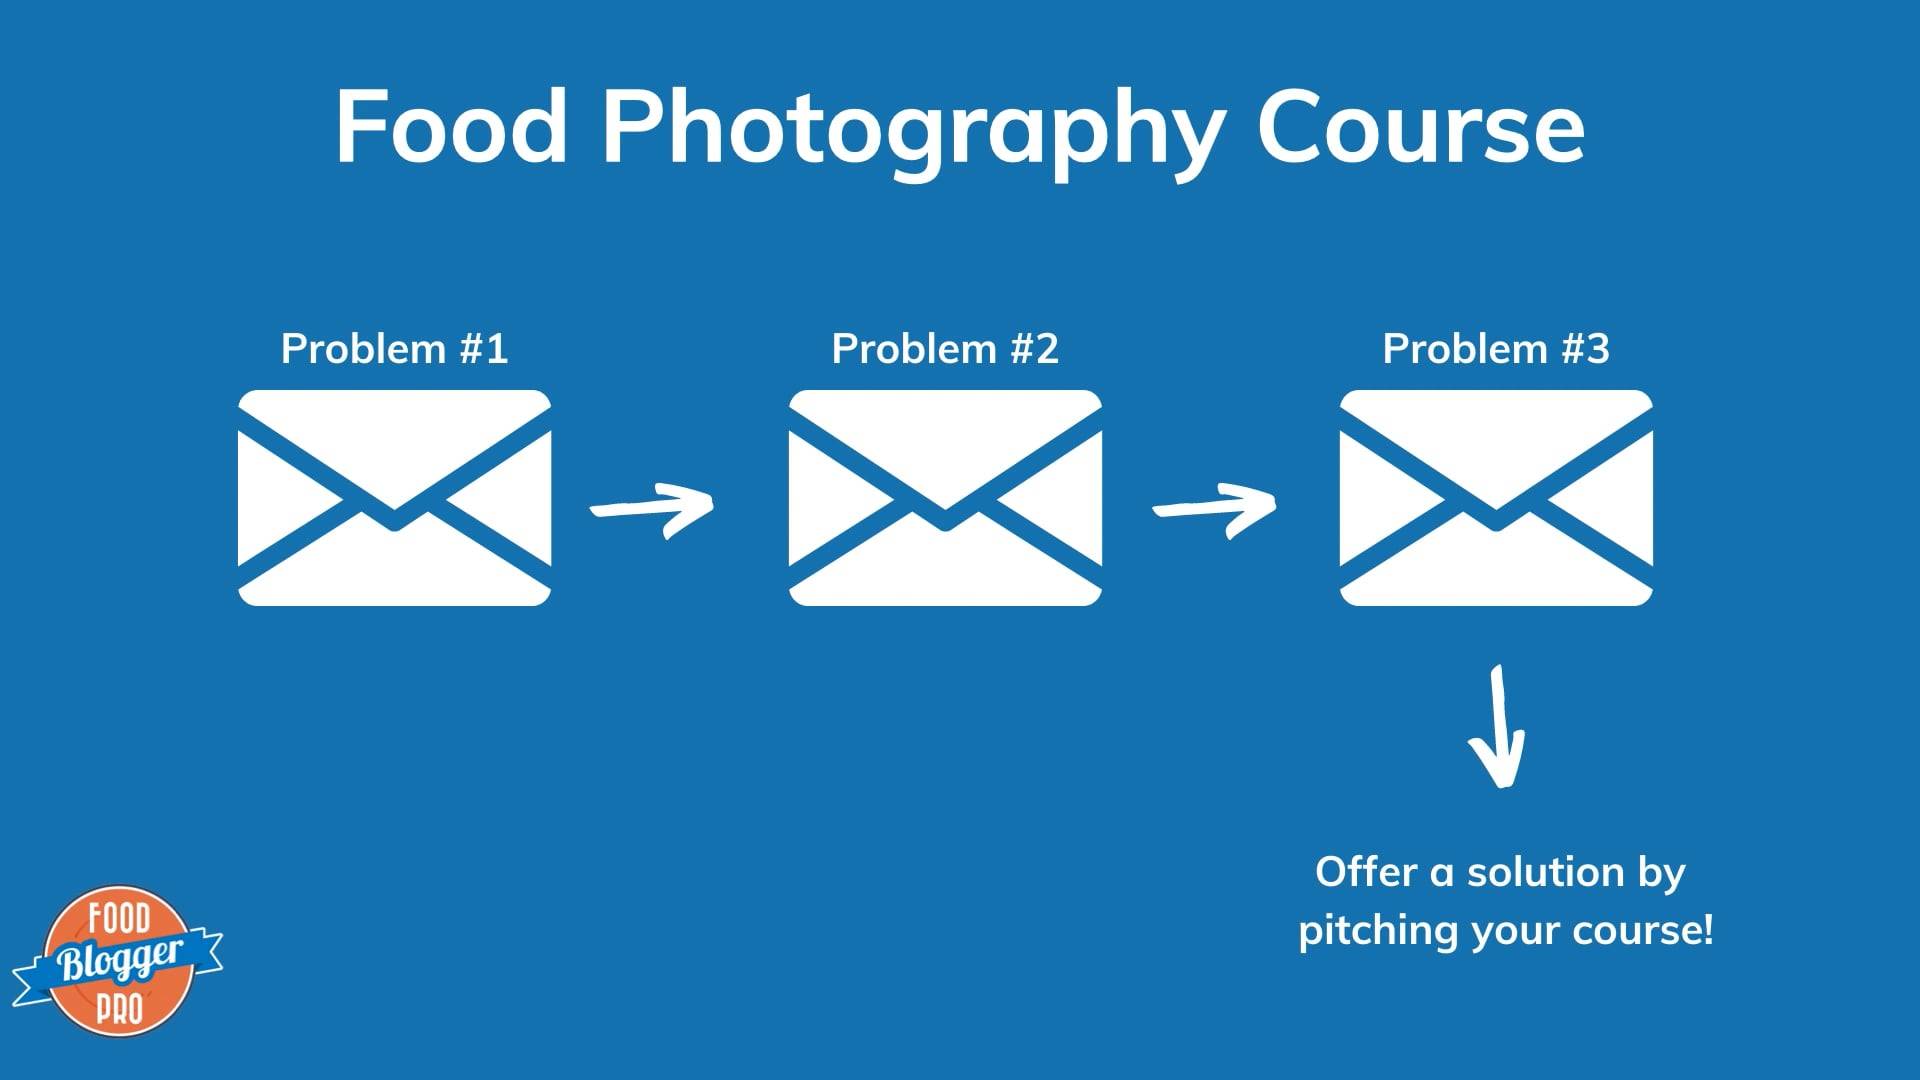 Blue slide with Food Blogger Pro logo with email graphics and a title that says 'Food Photography Course'